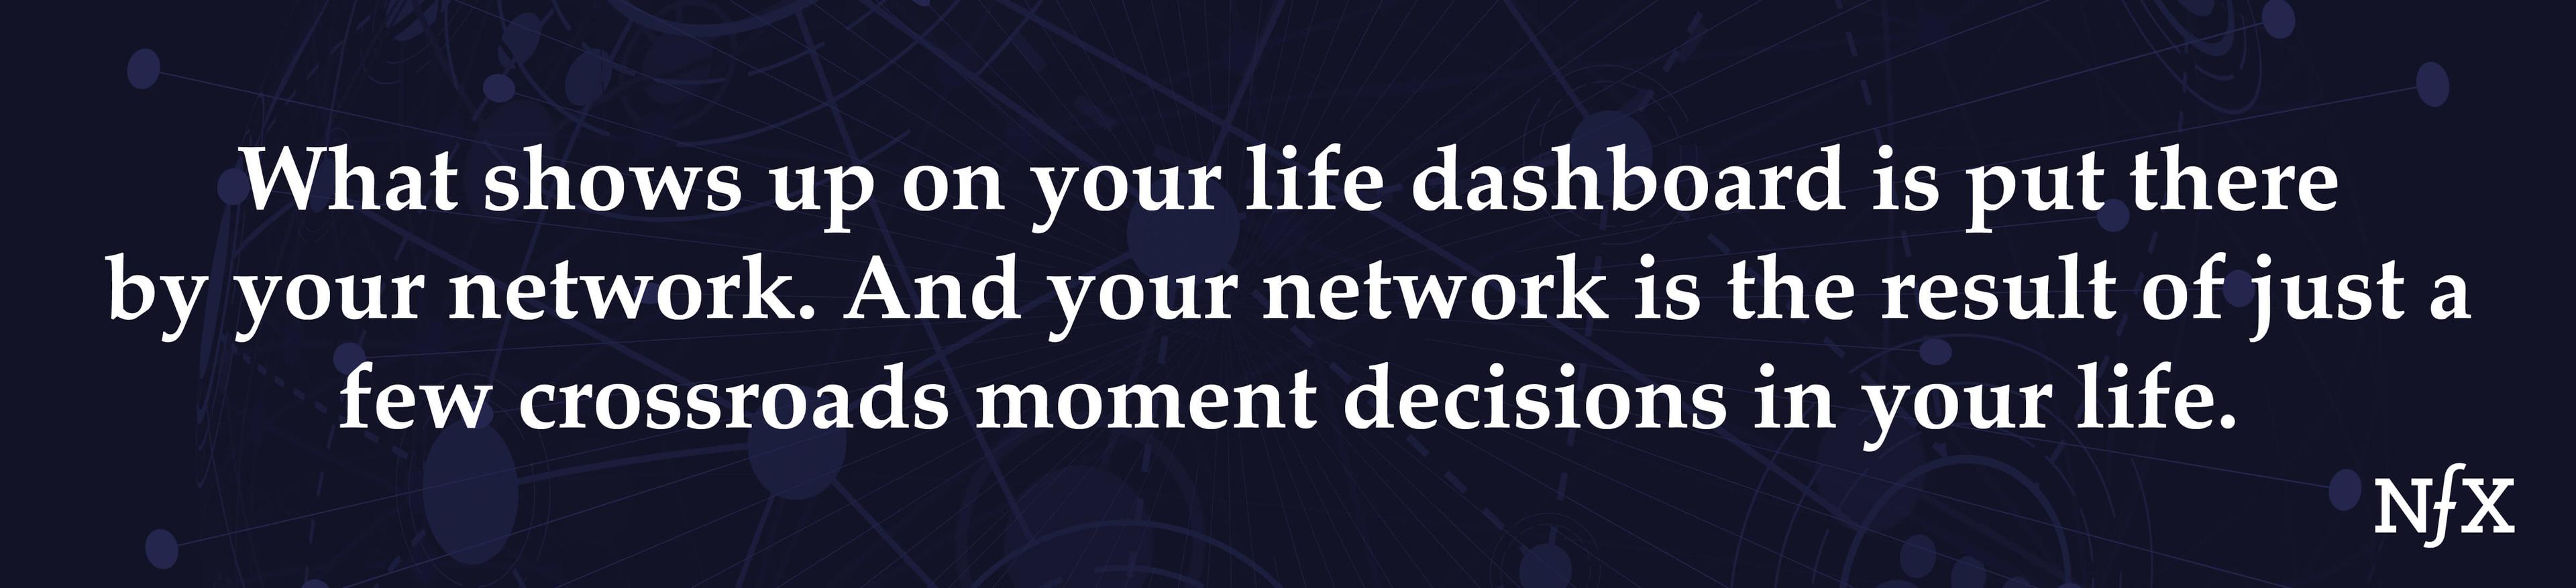 What shows up on your life dashboard is put there by your network. And your network is the result of just a few crossroads moment decisions in your life.